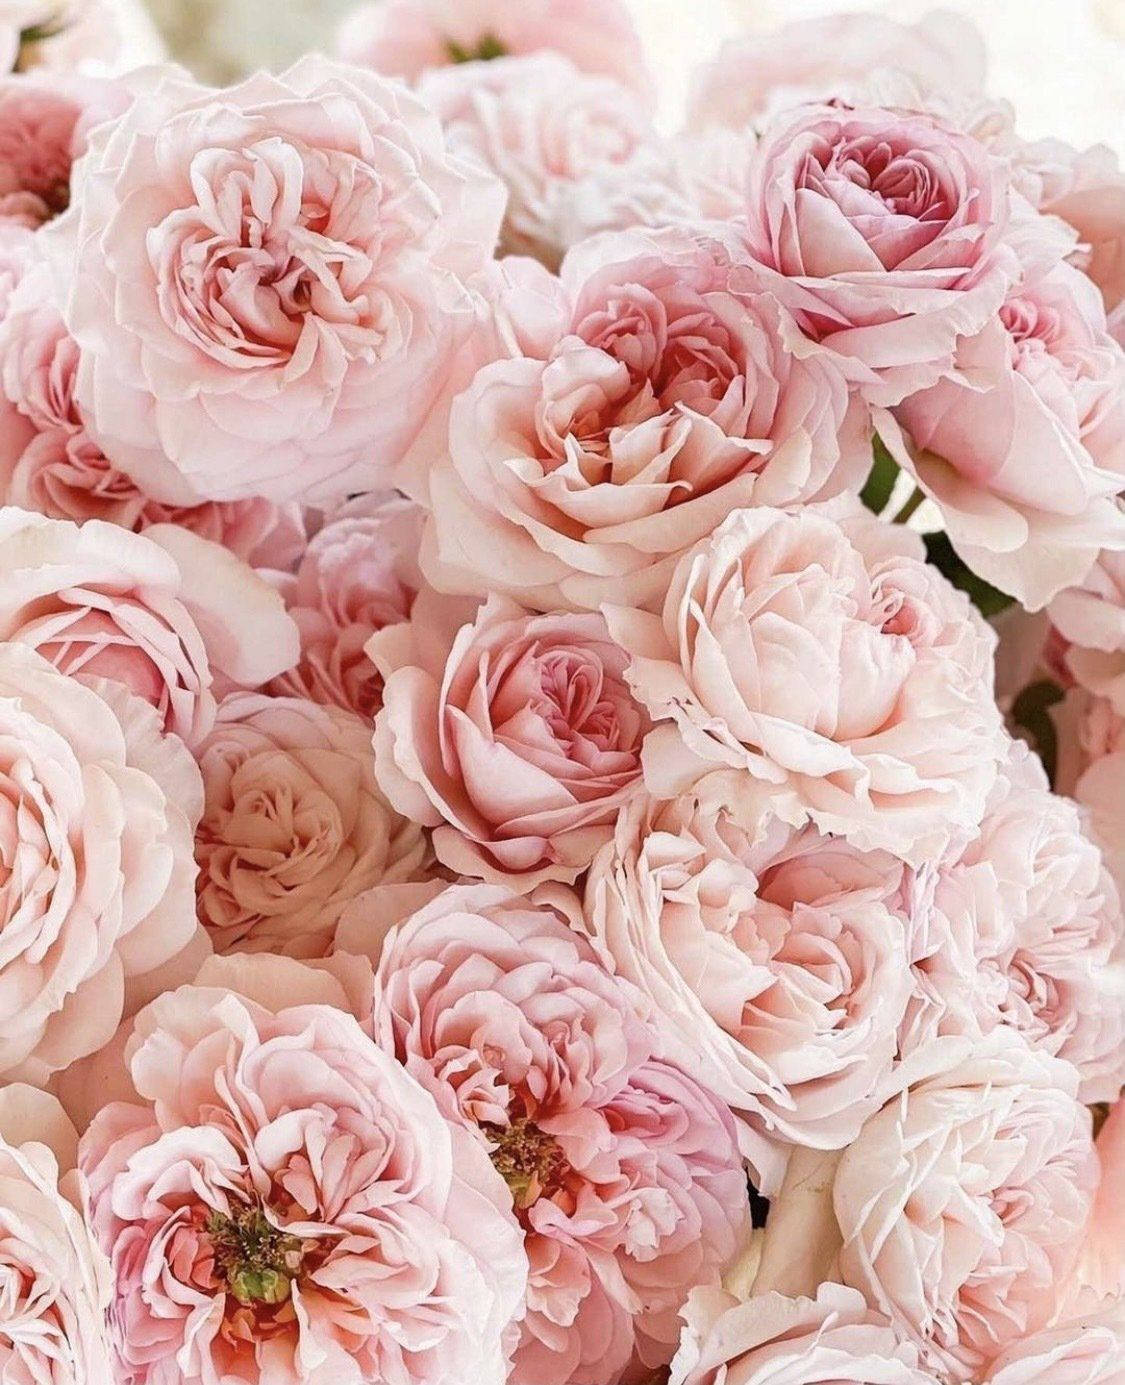 Tumblr Valentines Day Bouquet Of Pink Roses Wallpaper